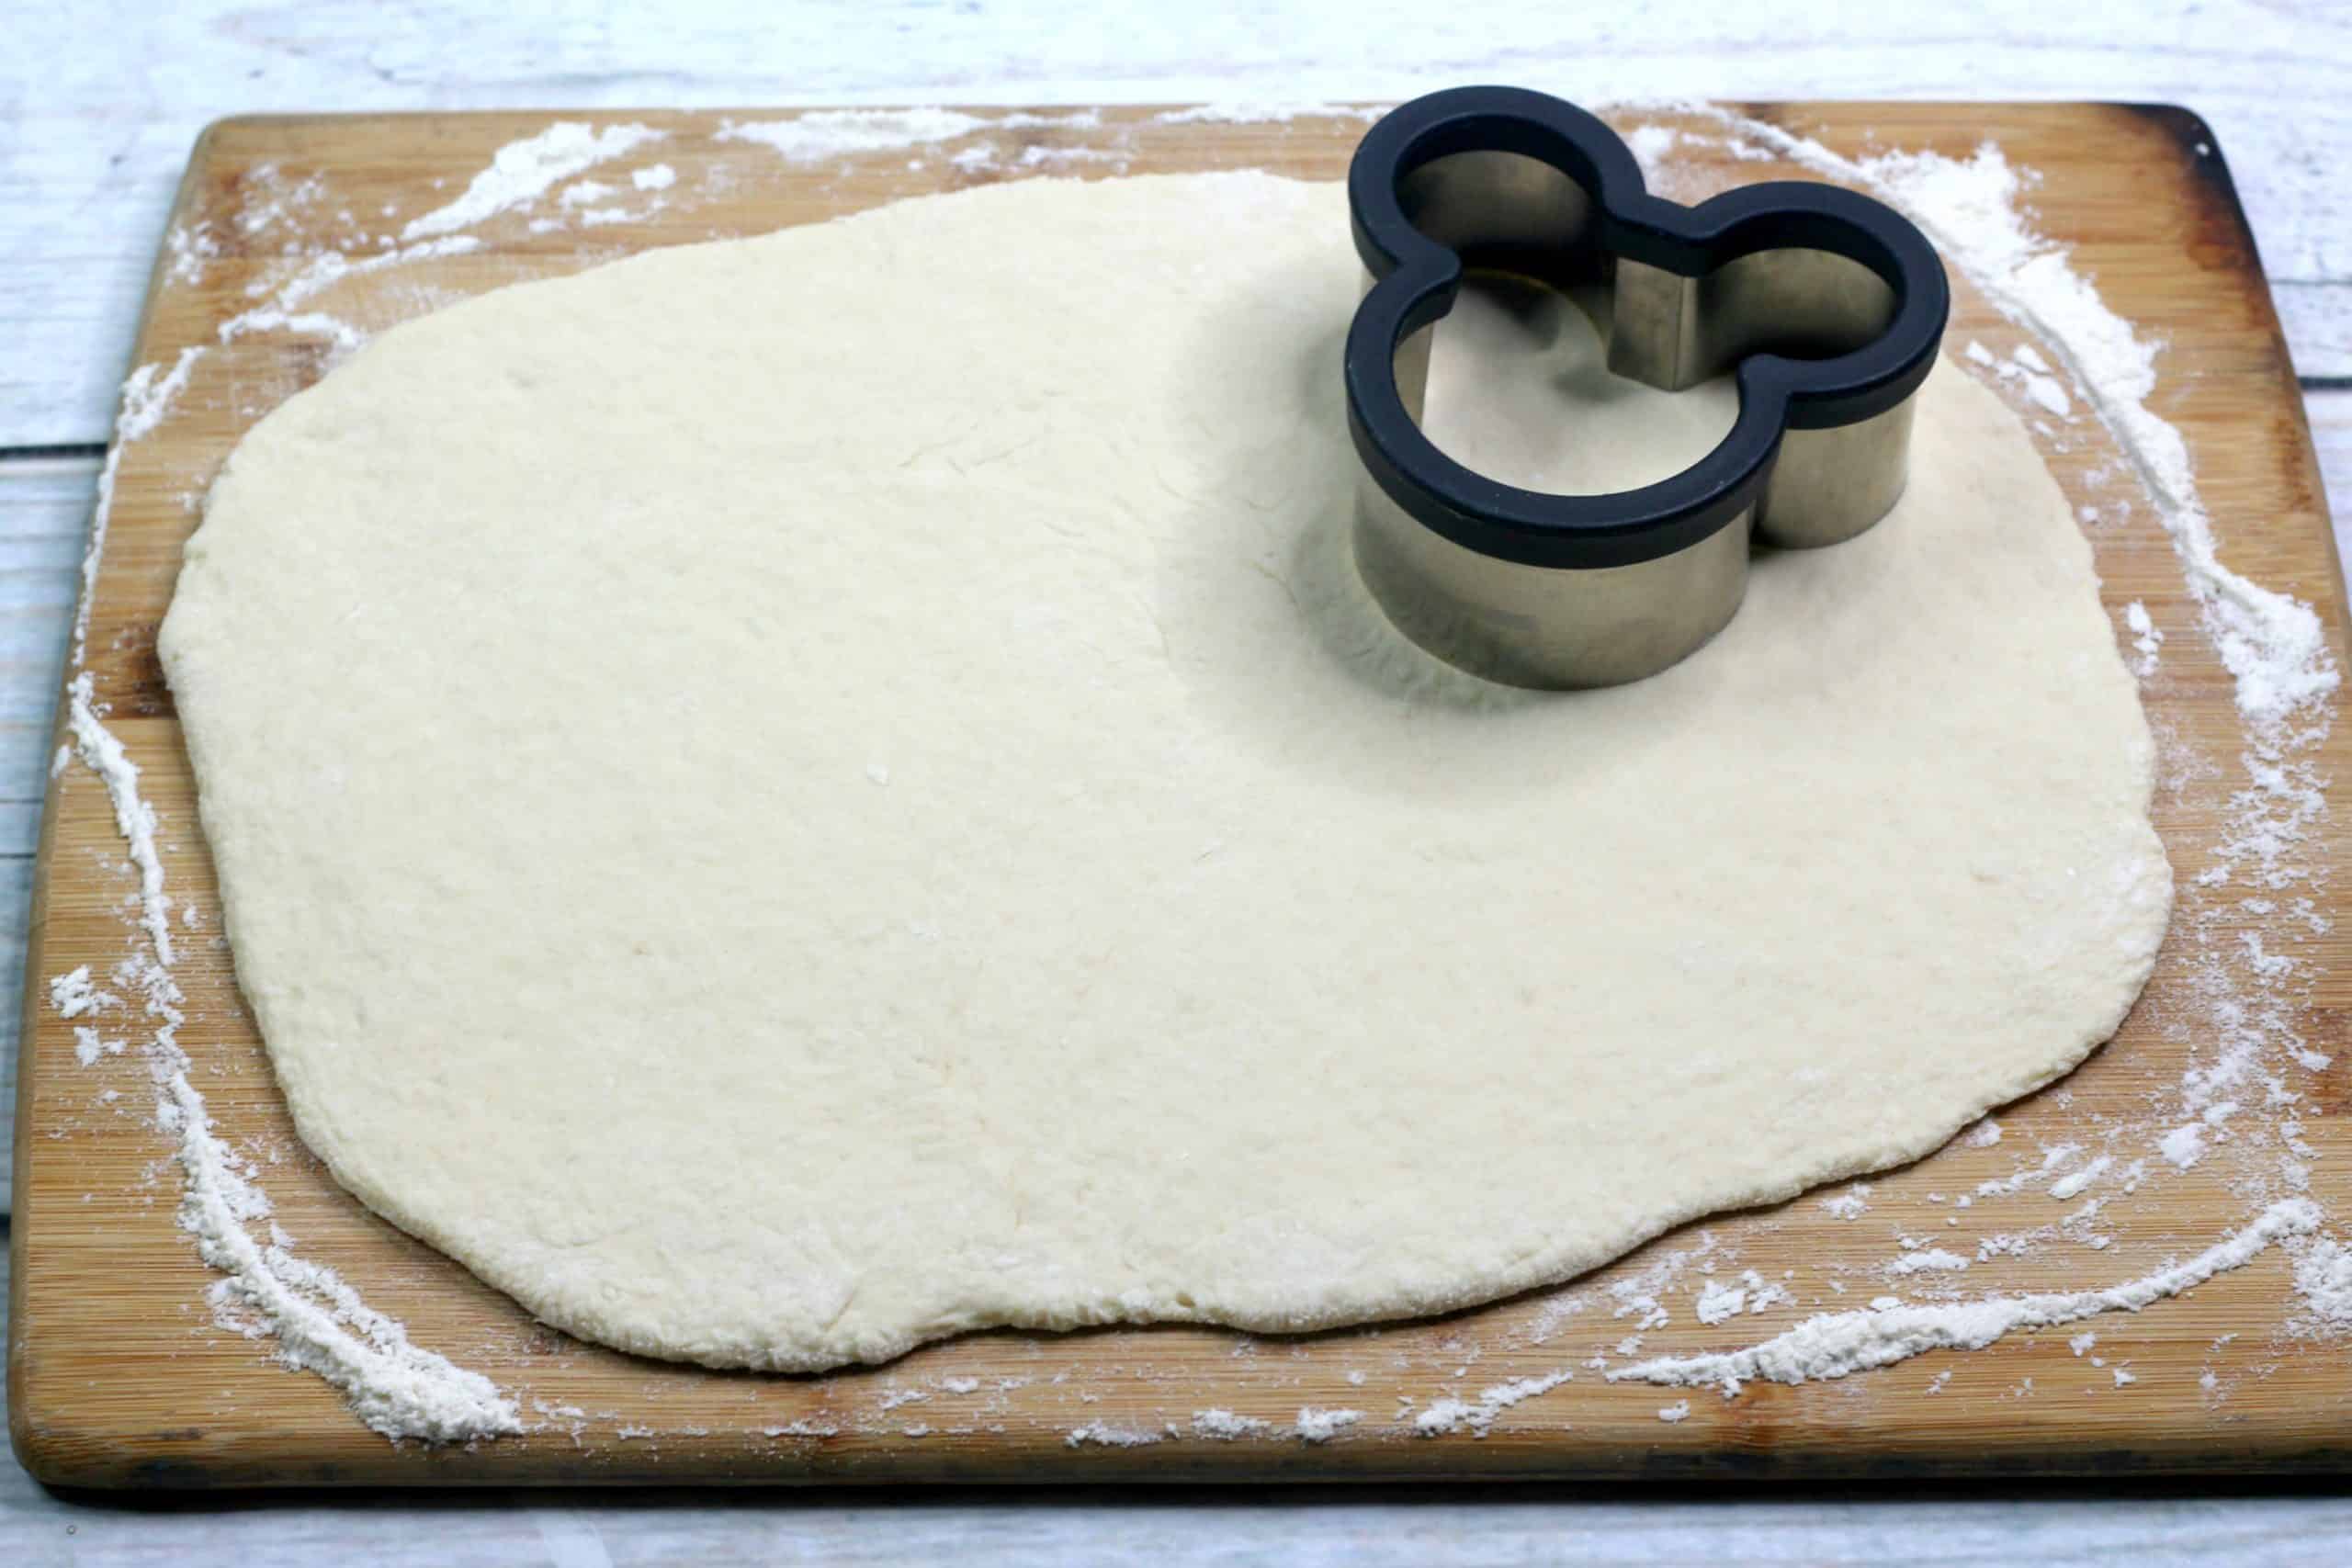 Rolled out dough with cookie cutter